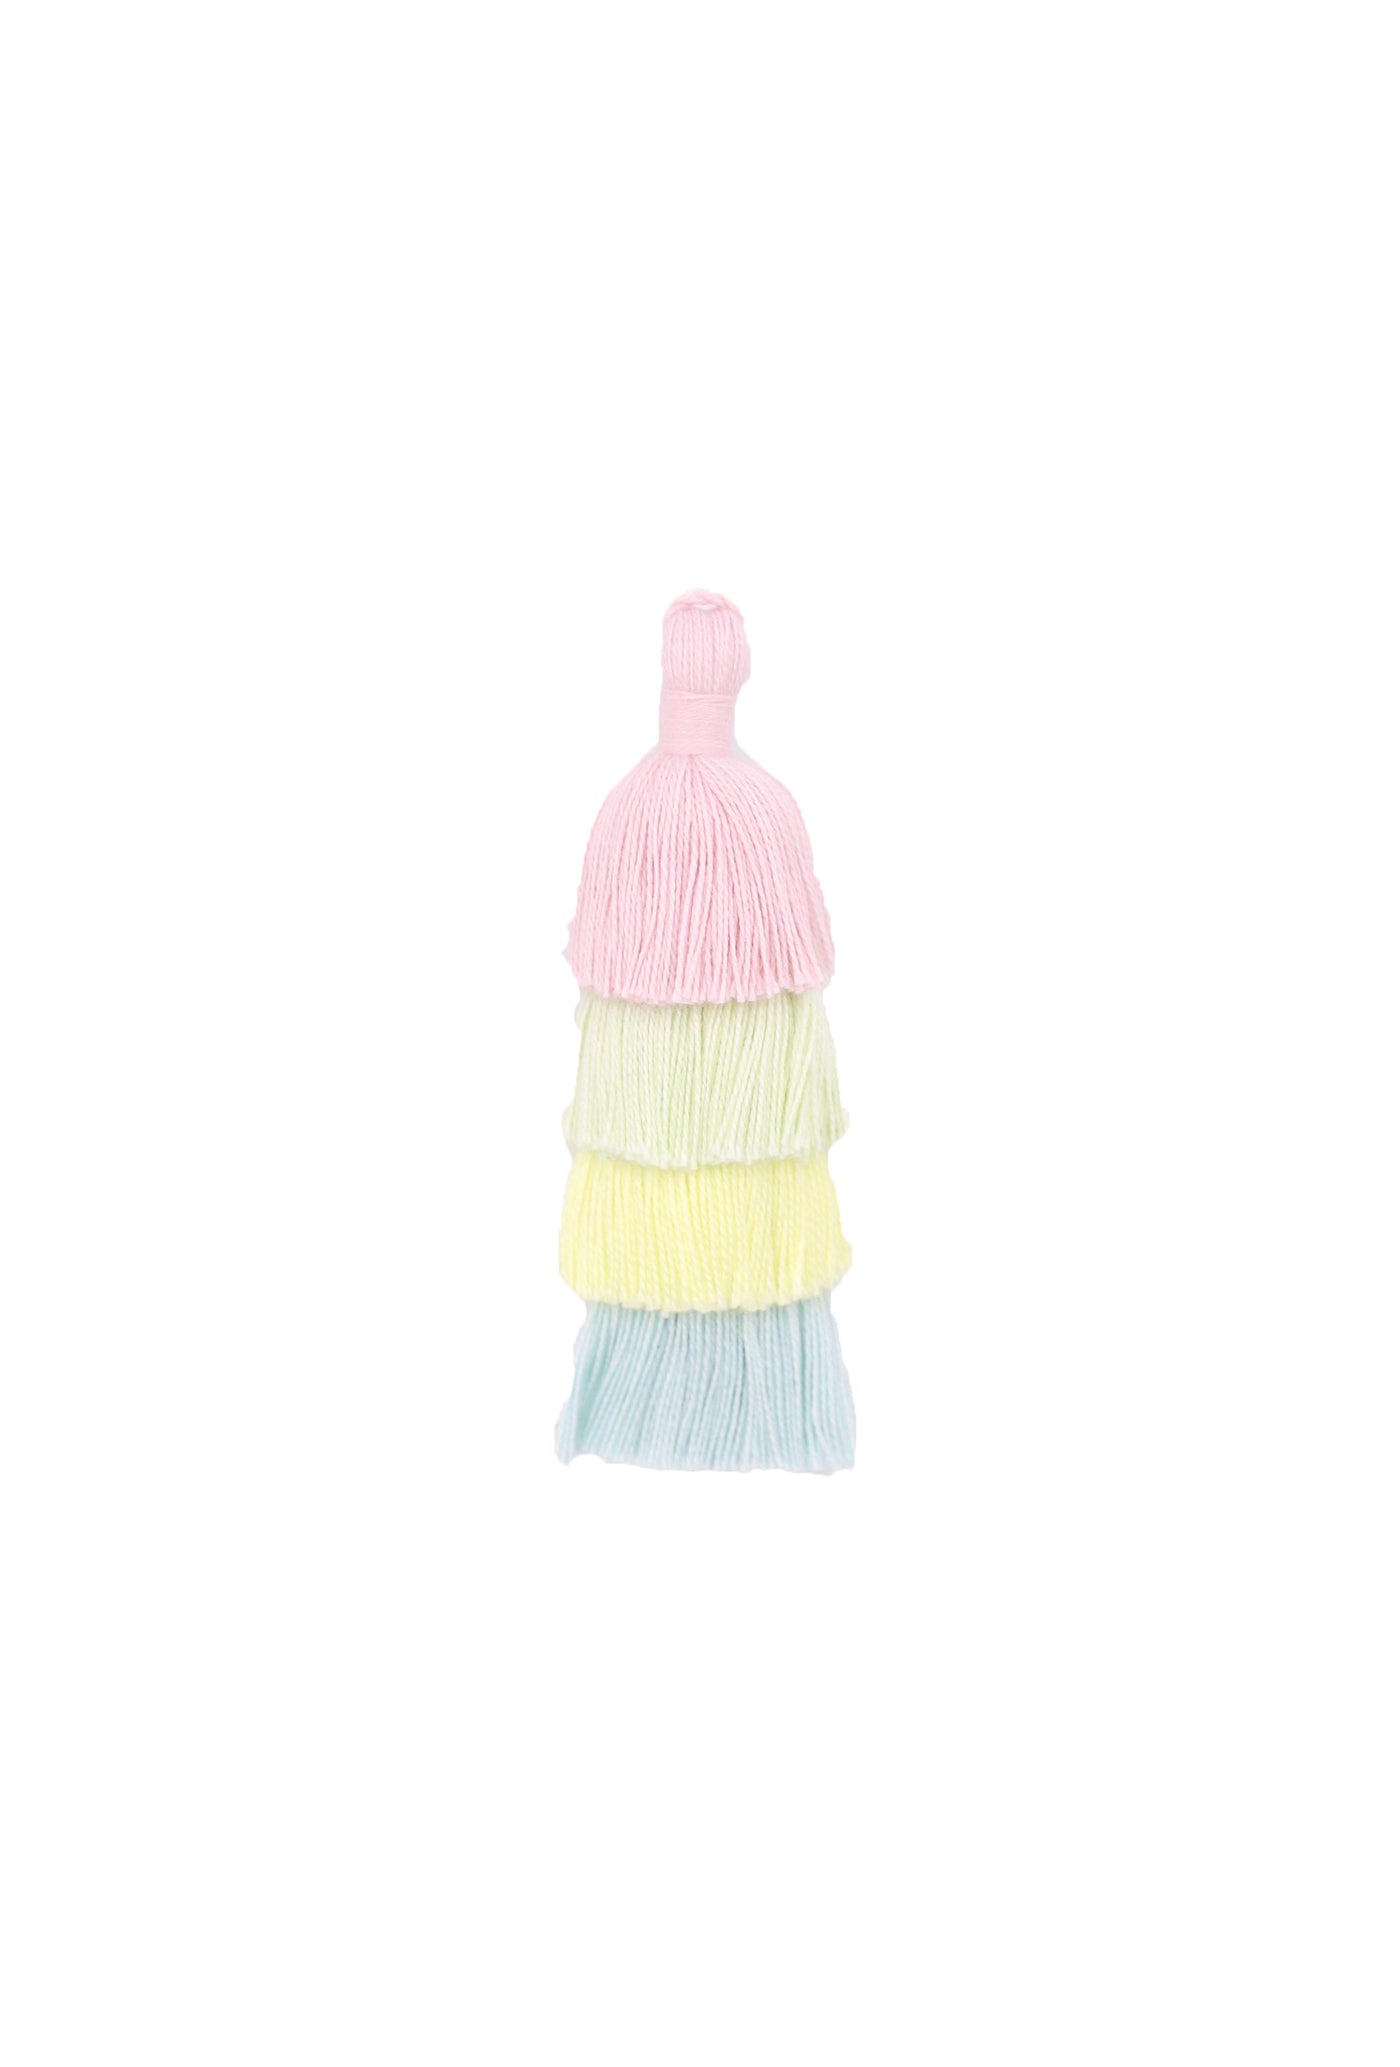 Spring Tiered Tassels, 4 Layered Pendant, Ready to Wear Earrings